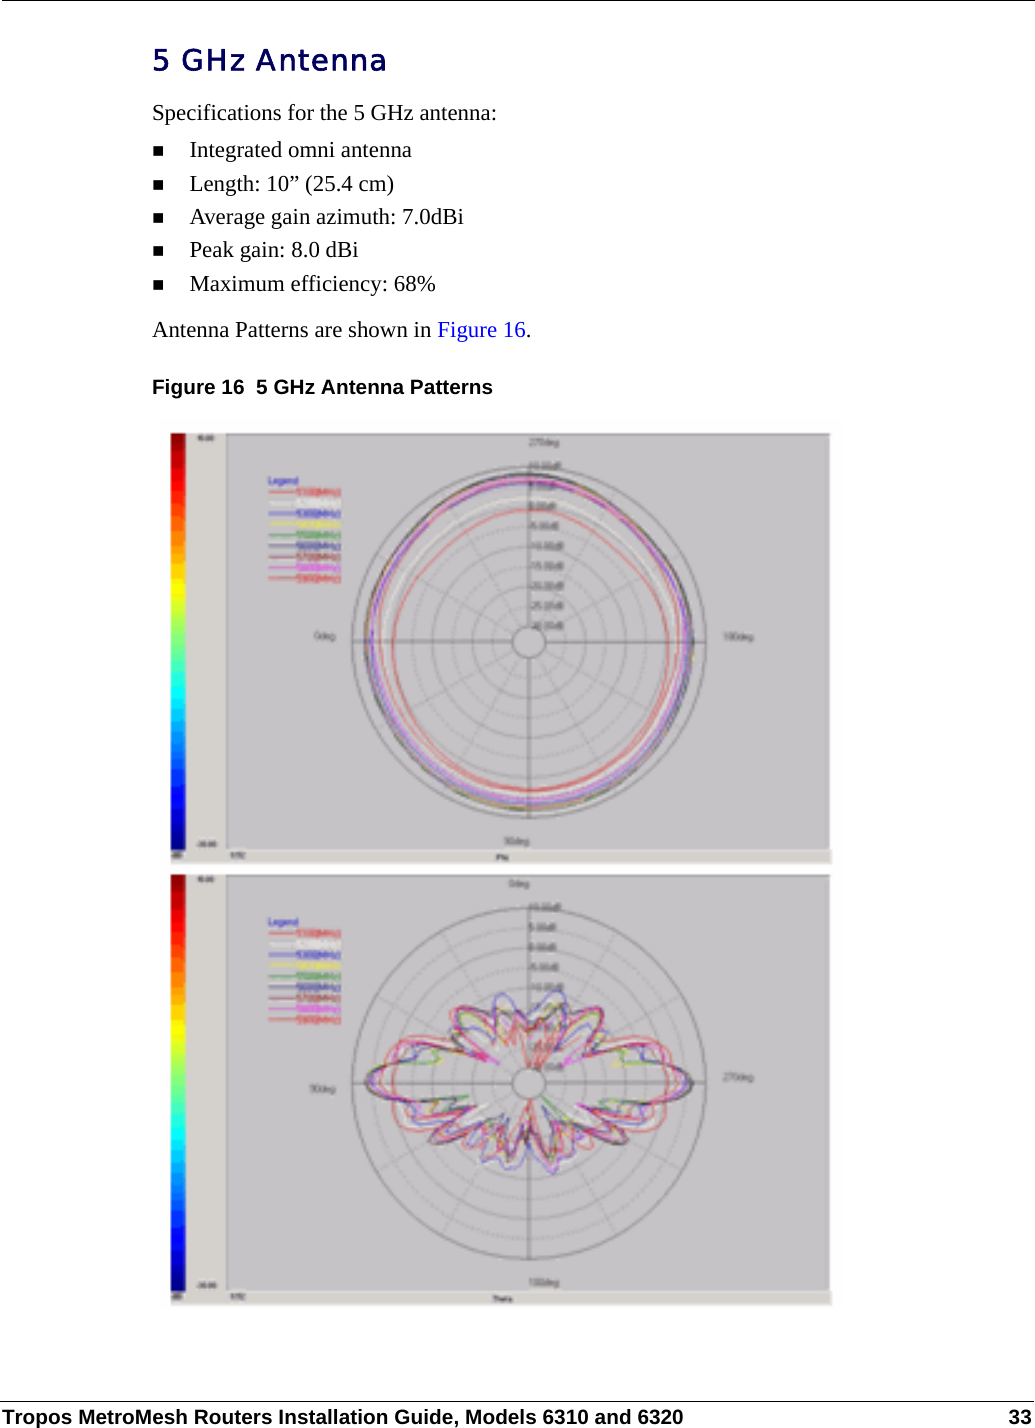 Tropos MetroMesh Routers Installation Guide, Models 6310 and 6320 335 GHz AntennaSpecifications for the 5 GHz antenna:Integrated omni antennaLength: 10” (25.4 cm)Average gain azimuth: 7.0dBiPeak gain: 8.0 dBiMaximum efficiency: 68% Antenna Patterns are shown in Figure 16.Figure 16  5 GHz Antenna Patterns